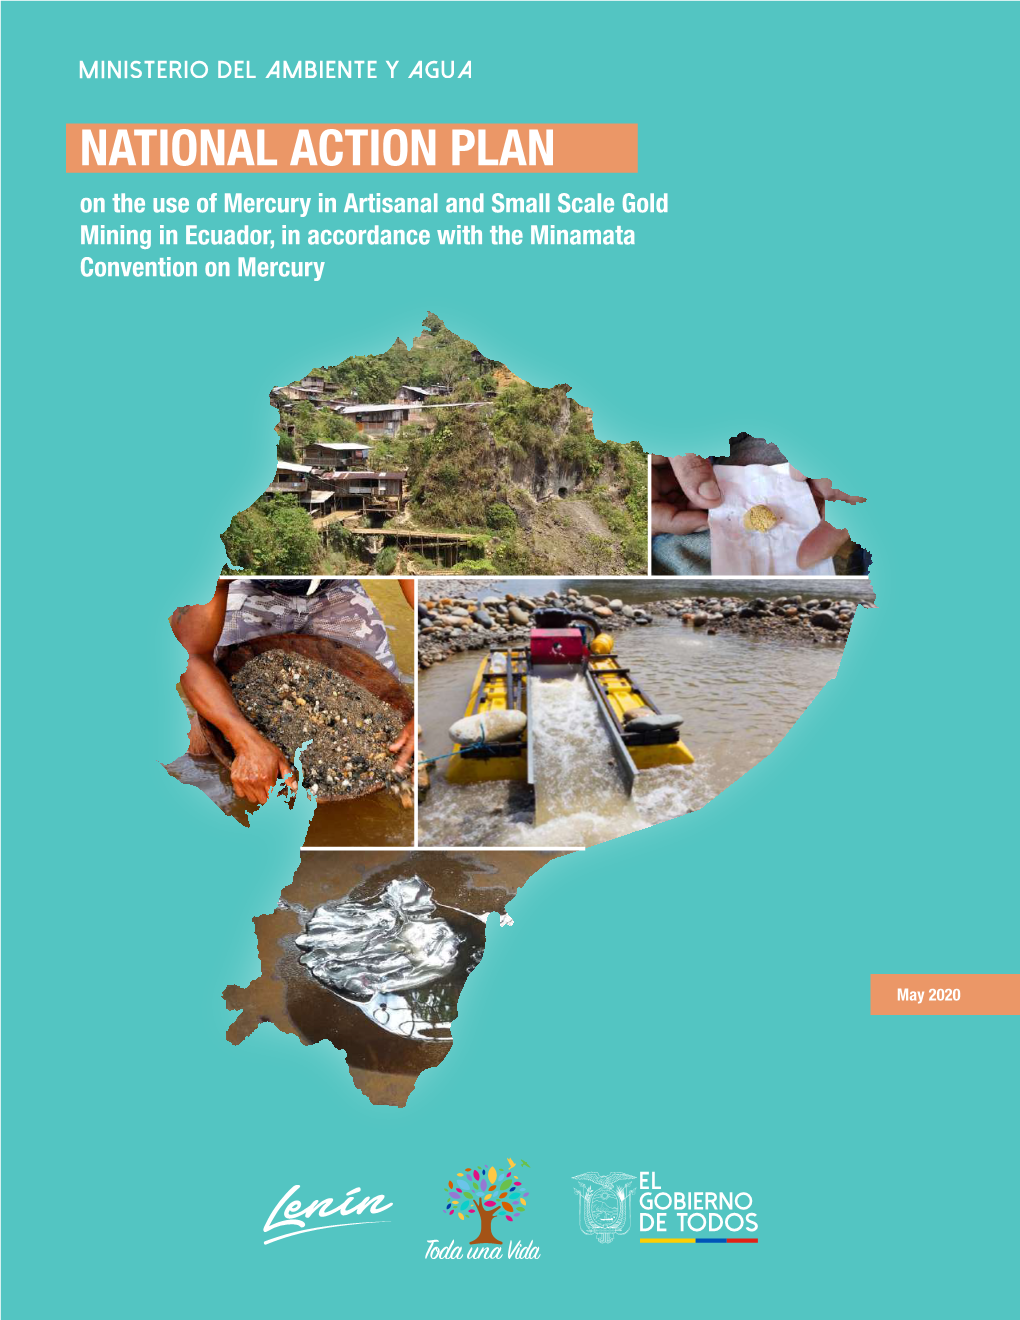 NATIONAL ACTION PLAN on the Use of Mercury in Artisanal and Small Scale Gold Mining in Ecuador, in Accordance with the Minamata Convention on Mercury